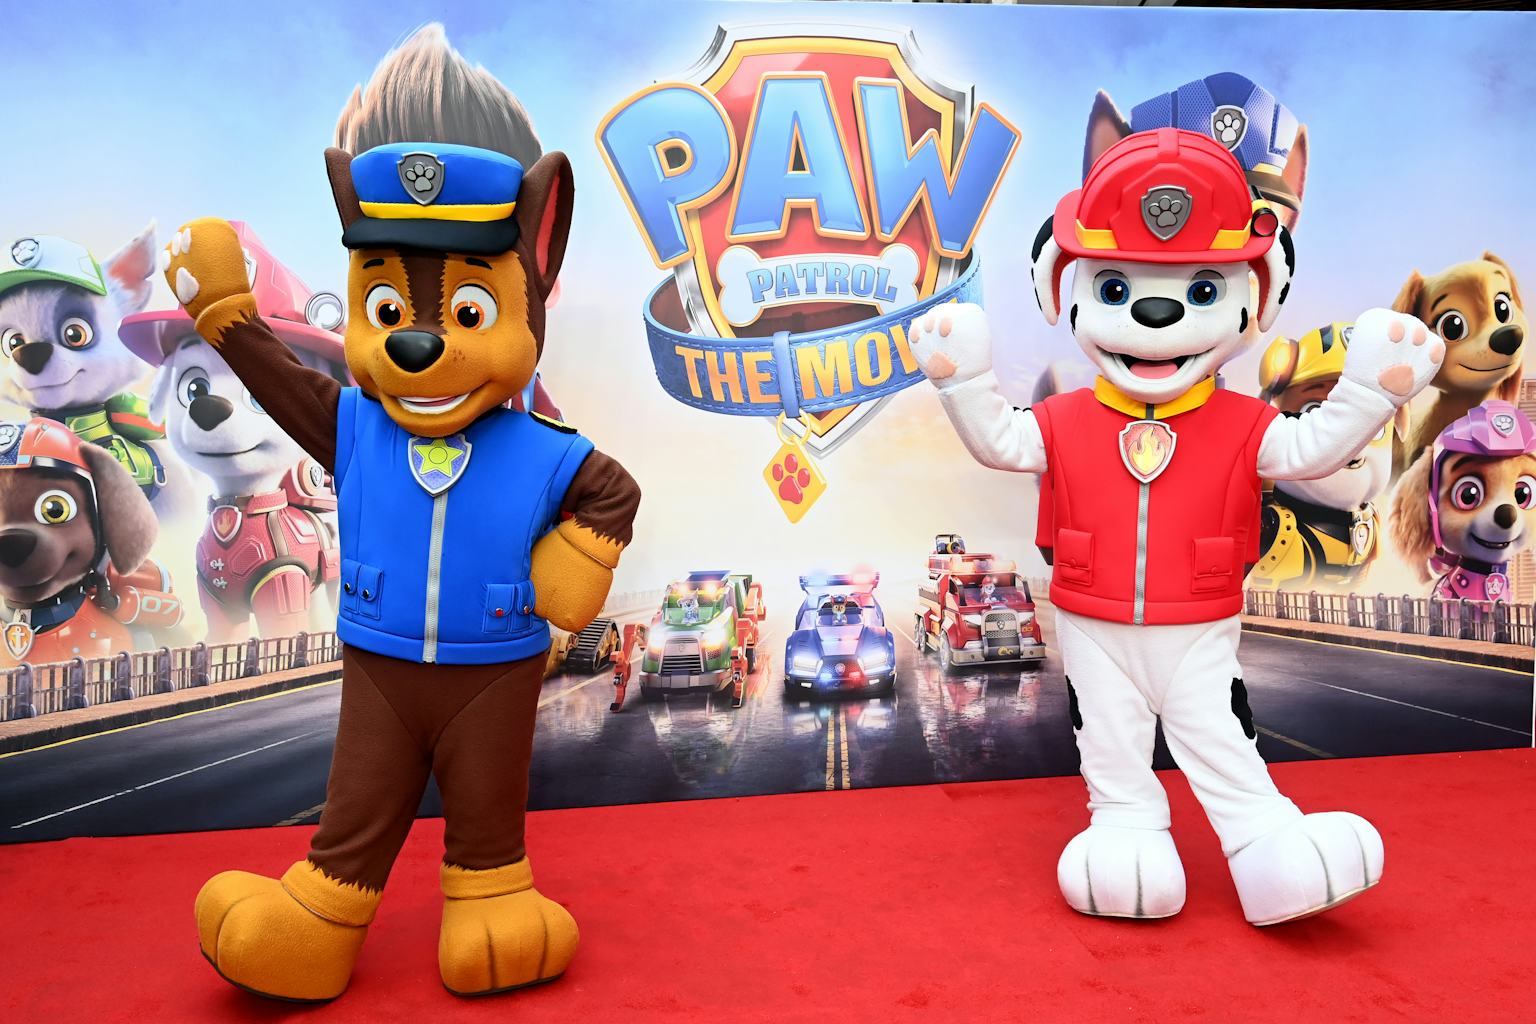 Camp Romper 2021 & 'PAW Patrol The Movie' Are Ready To Celebrate